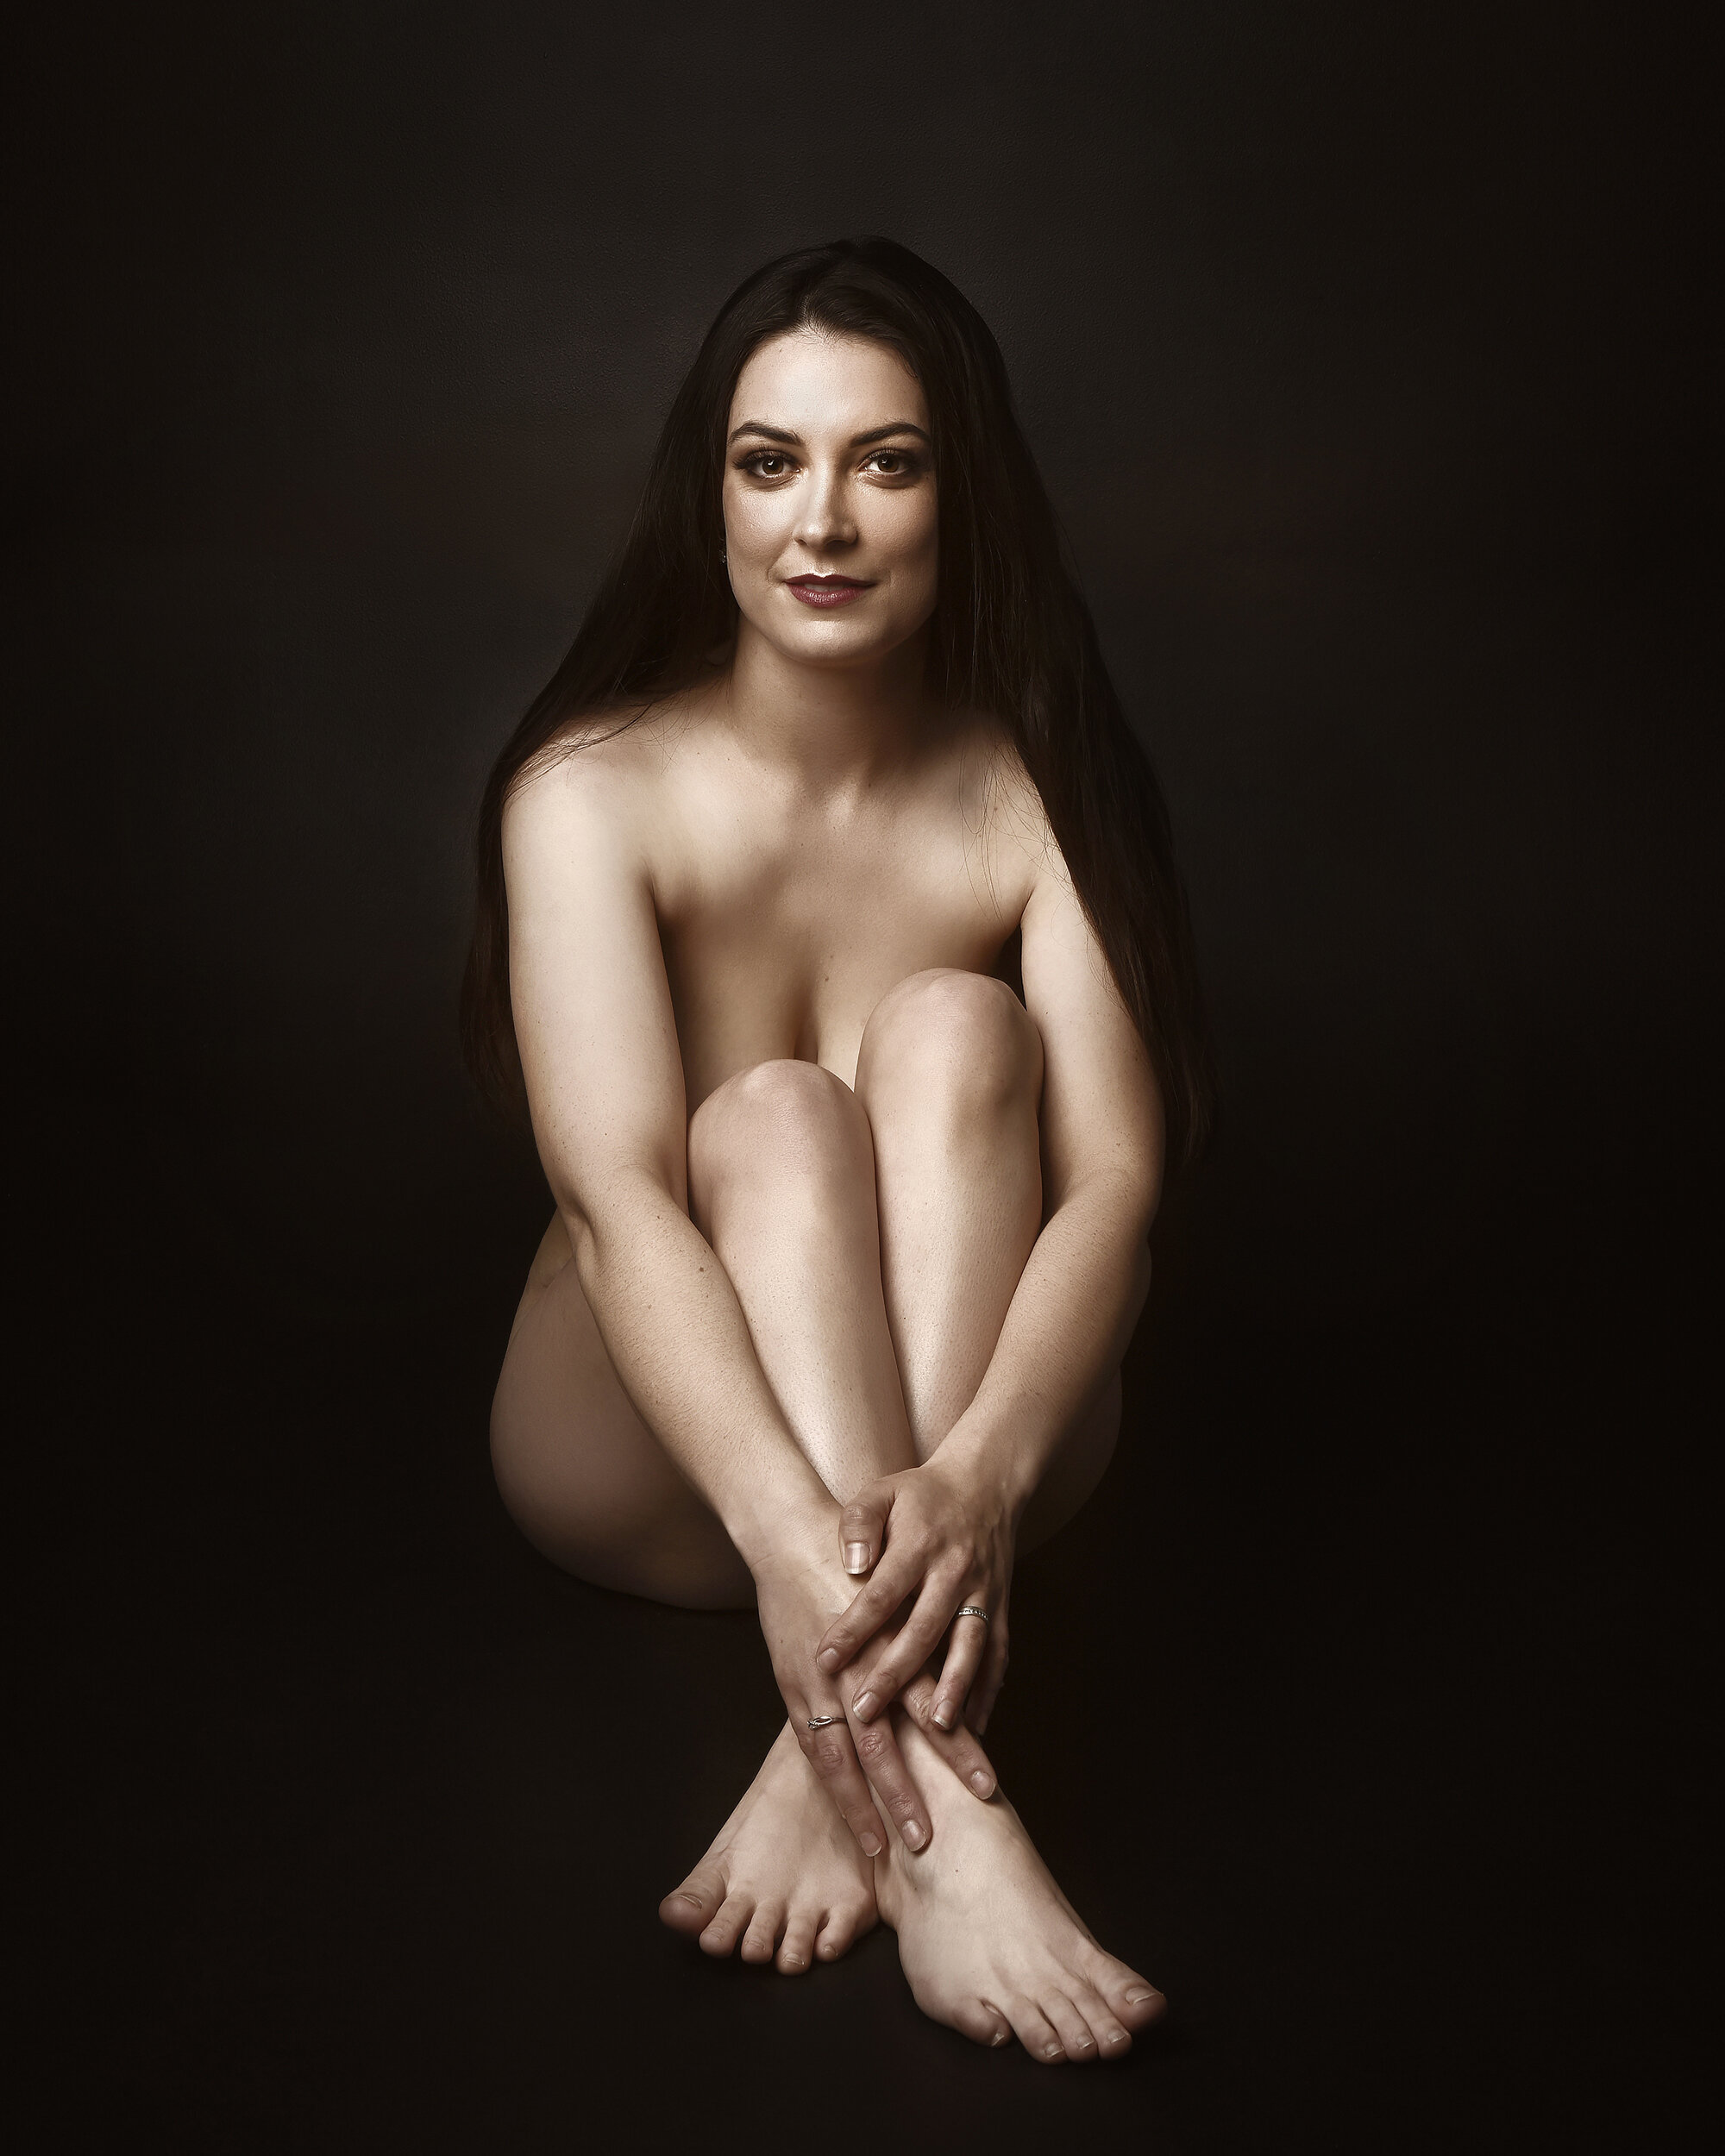 Focus on the positive photography nude